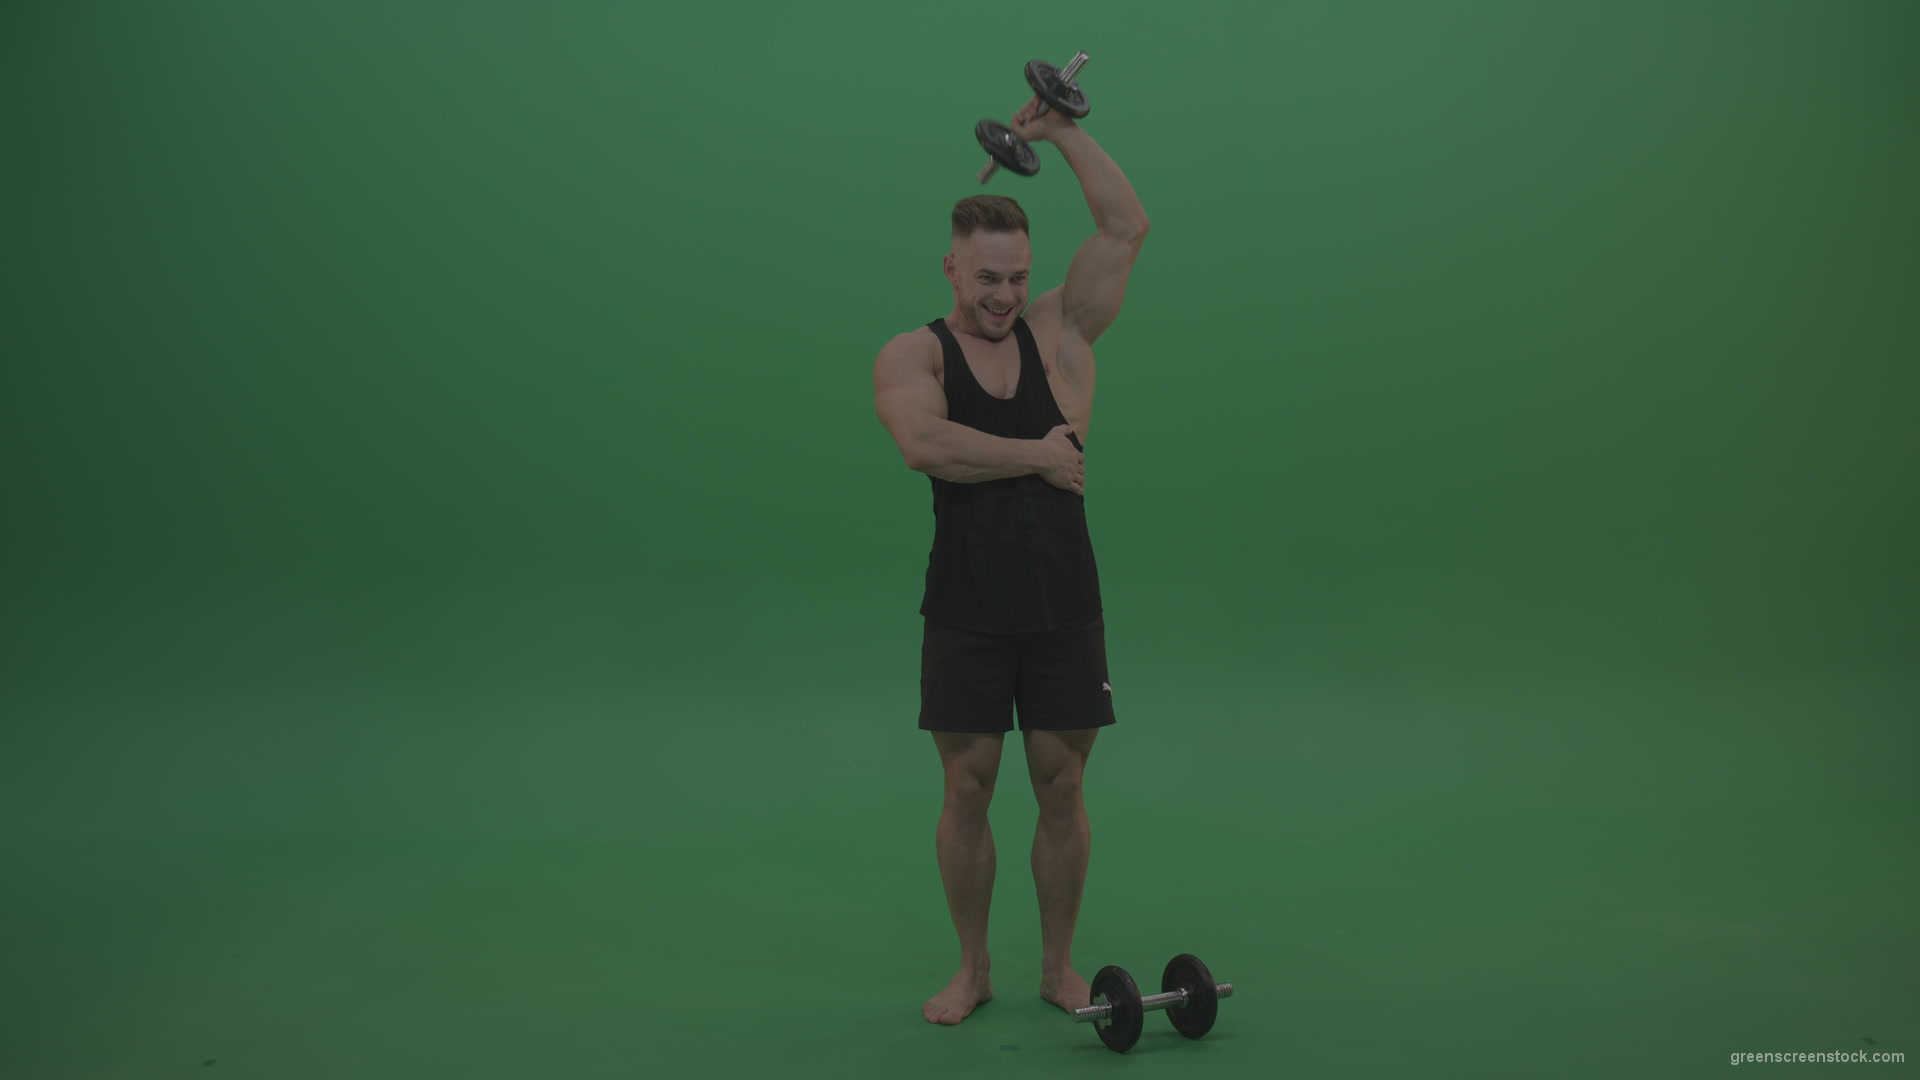 vj video background Young_Handsome_Bodybuilder_Warming_Up_Deltoid_Muscles_Work_Out_Dumbbell_Pull_Ups_On_Green_Screen_Chroma_Key_Wall_Background_003